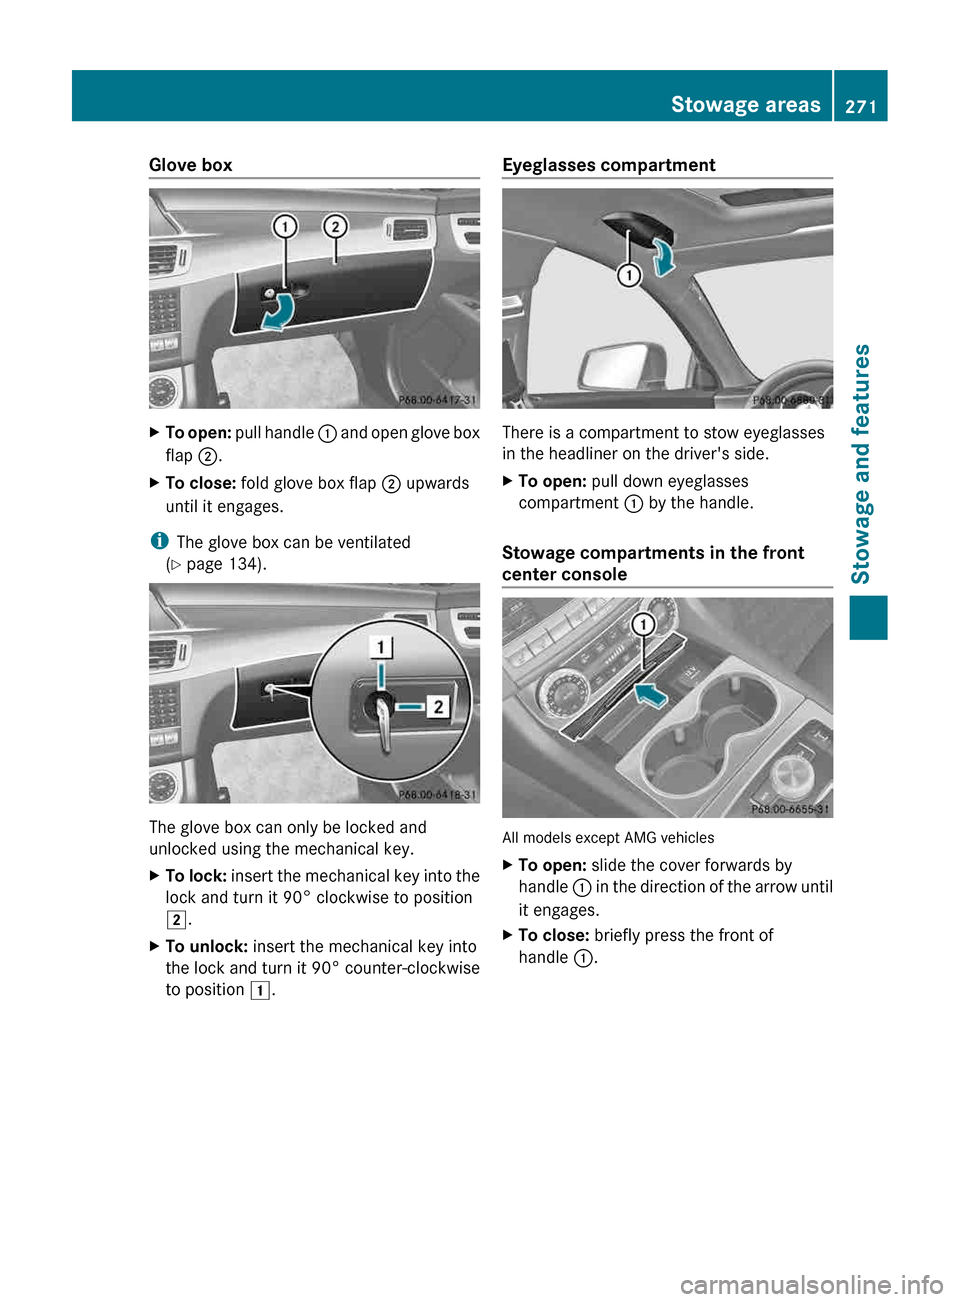 MERCEDES-BENZ CLS-Class 2013 W218 Owners Manual Glove box
X
To open: pull handle  : and open glove box
flap  ;.
X To close:  fold glove box flap  ; upwards
until it engages.
i The glove box can be ventilated
(Y page 134). The glove box can only be 